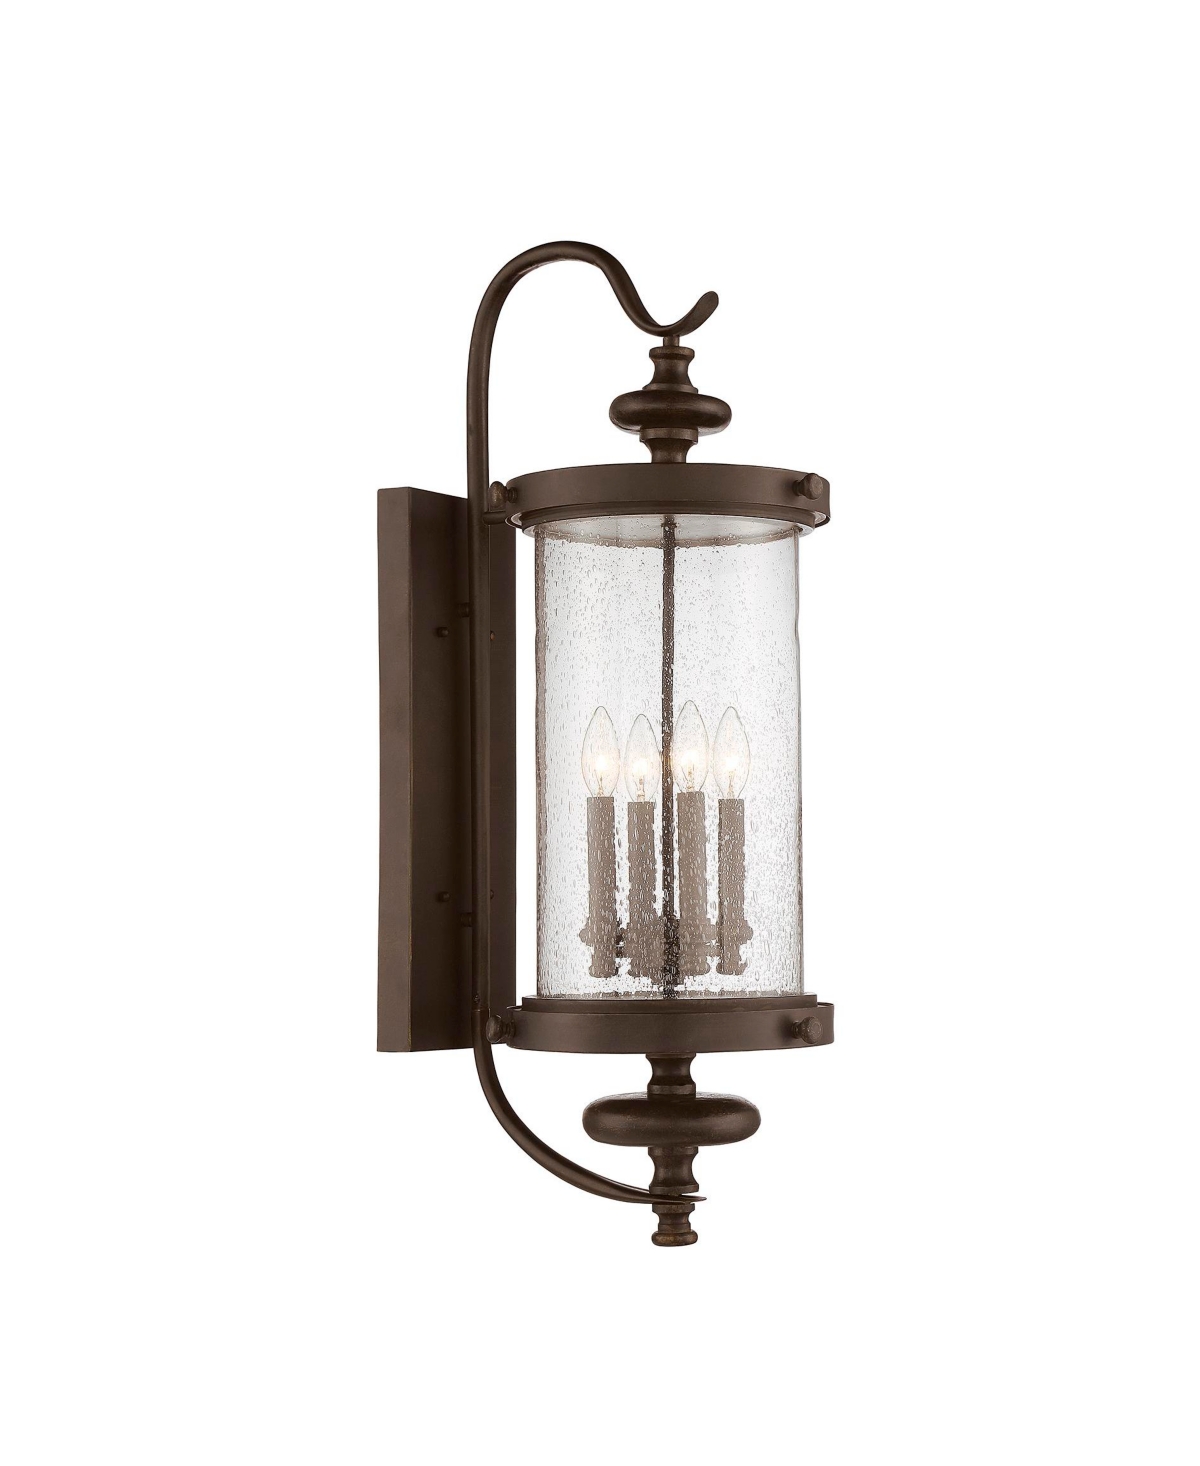 Savoy House Palmer 4-Light Outdoor Wall Lantern in Walnut Patina (INCOMPLETE SET, MISSING GLASS PIECE)